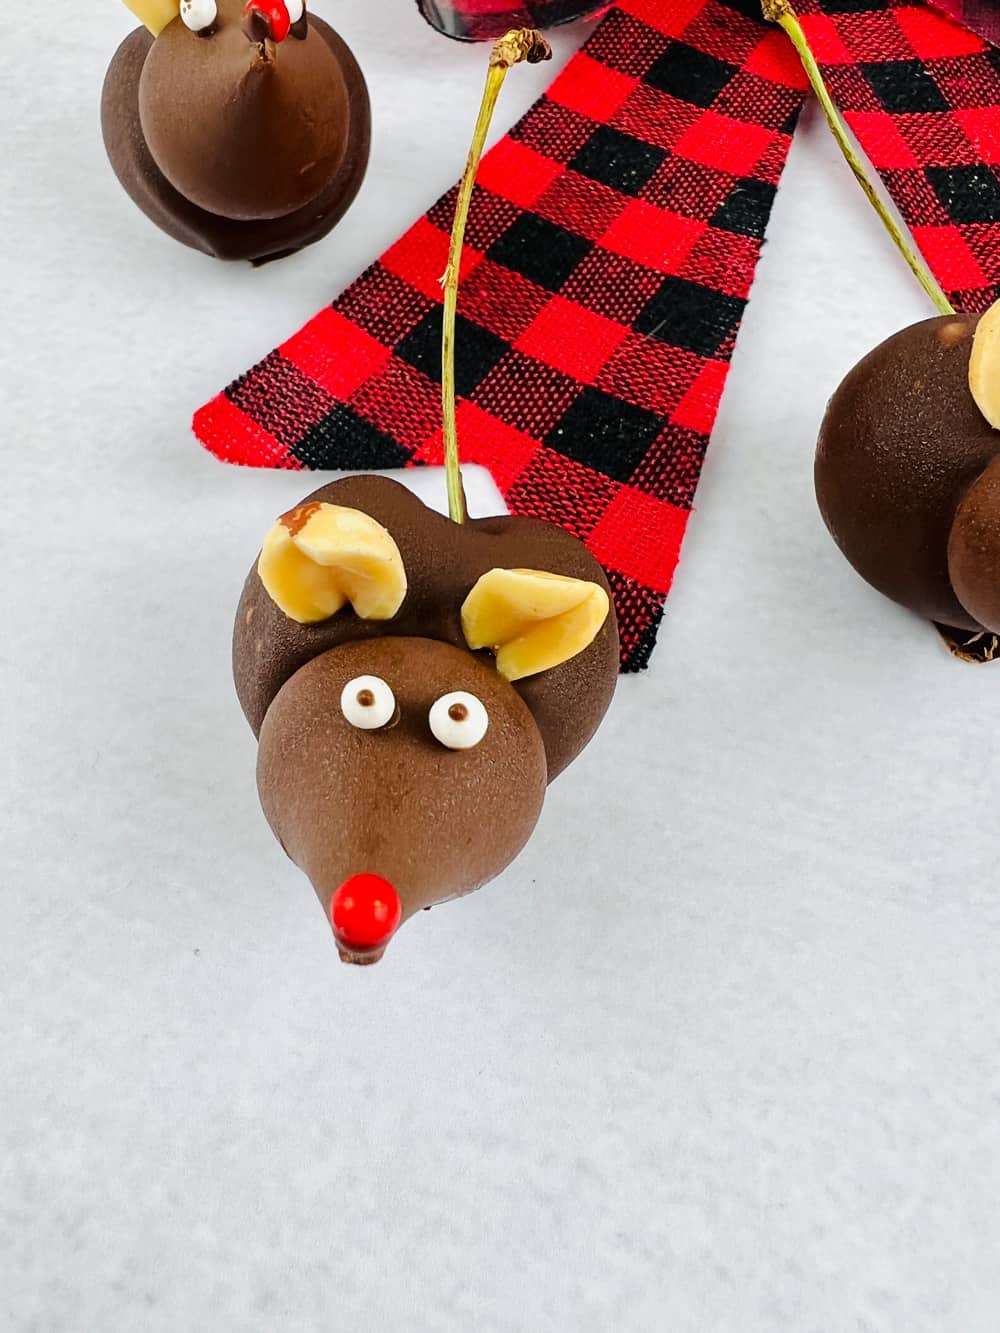 How to Make Chocolate Cherry Mice: The Cutest Chocolate Holiday Treat